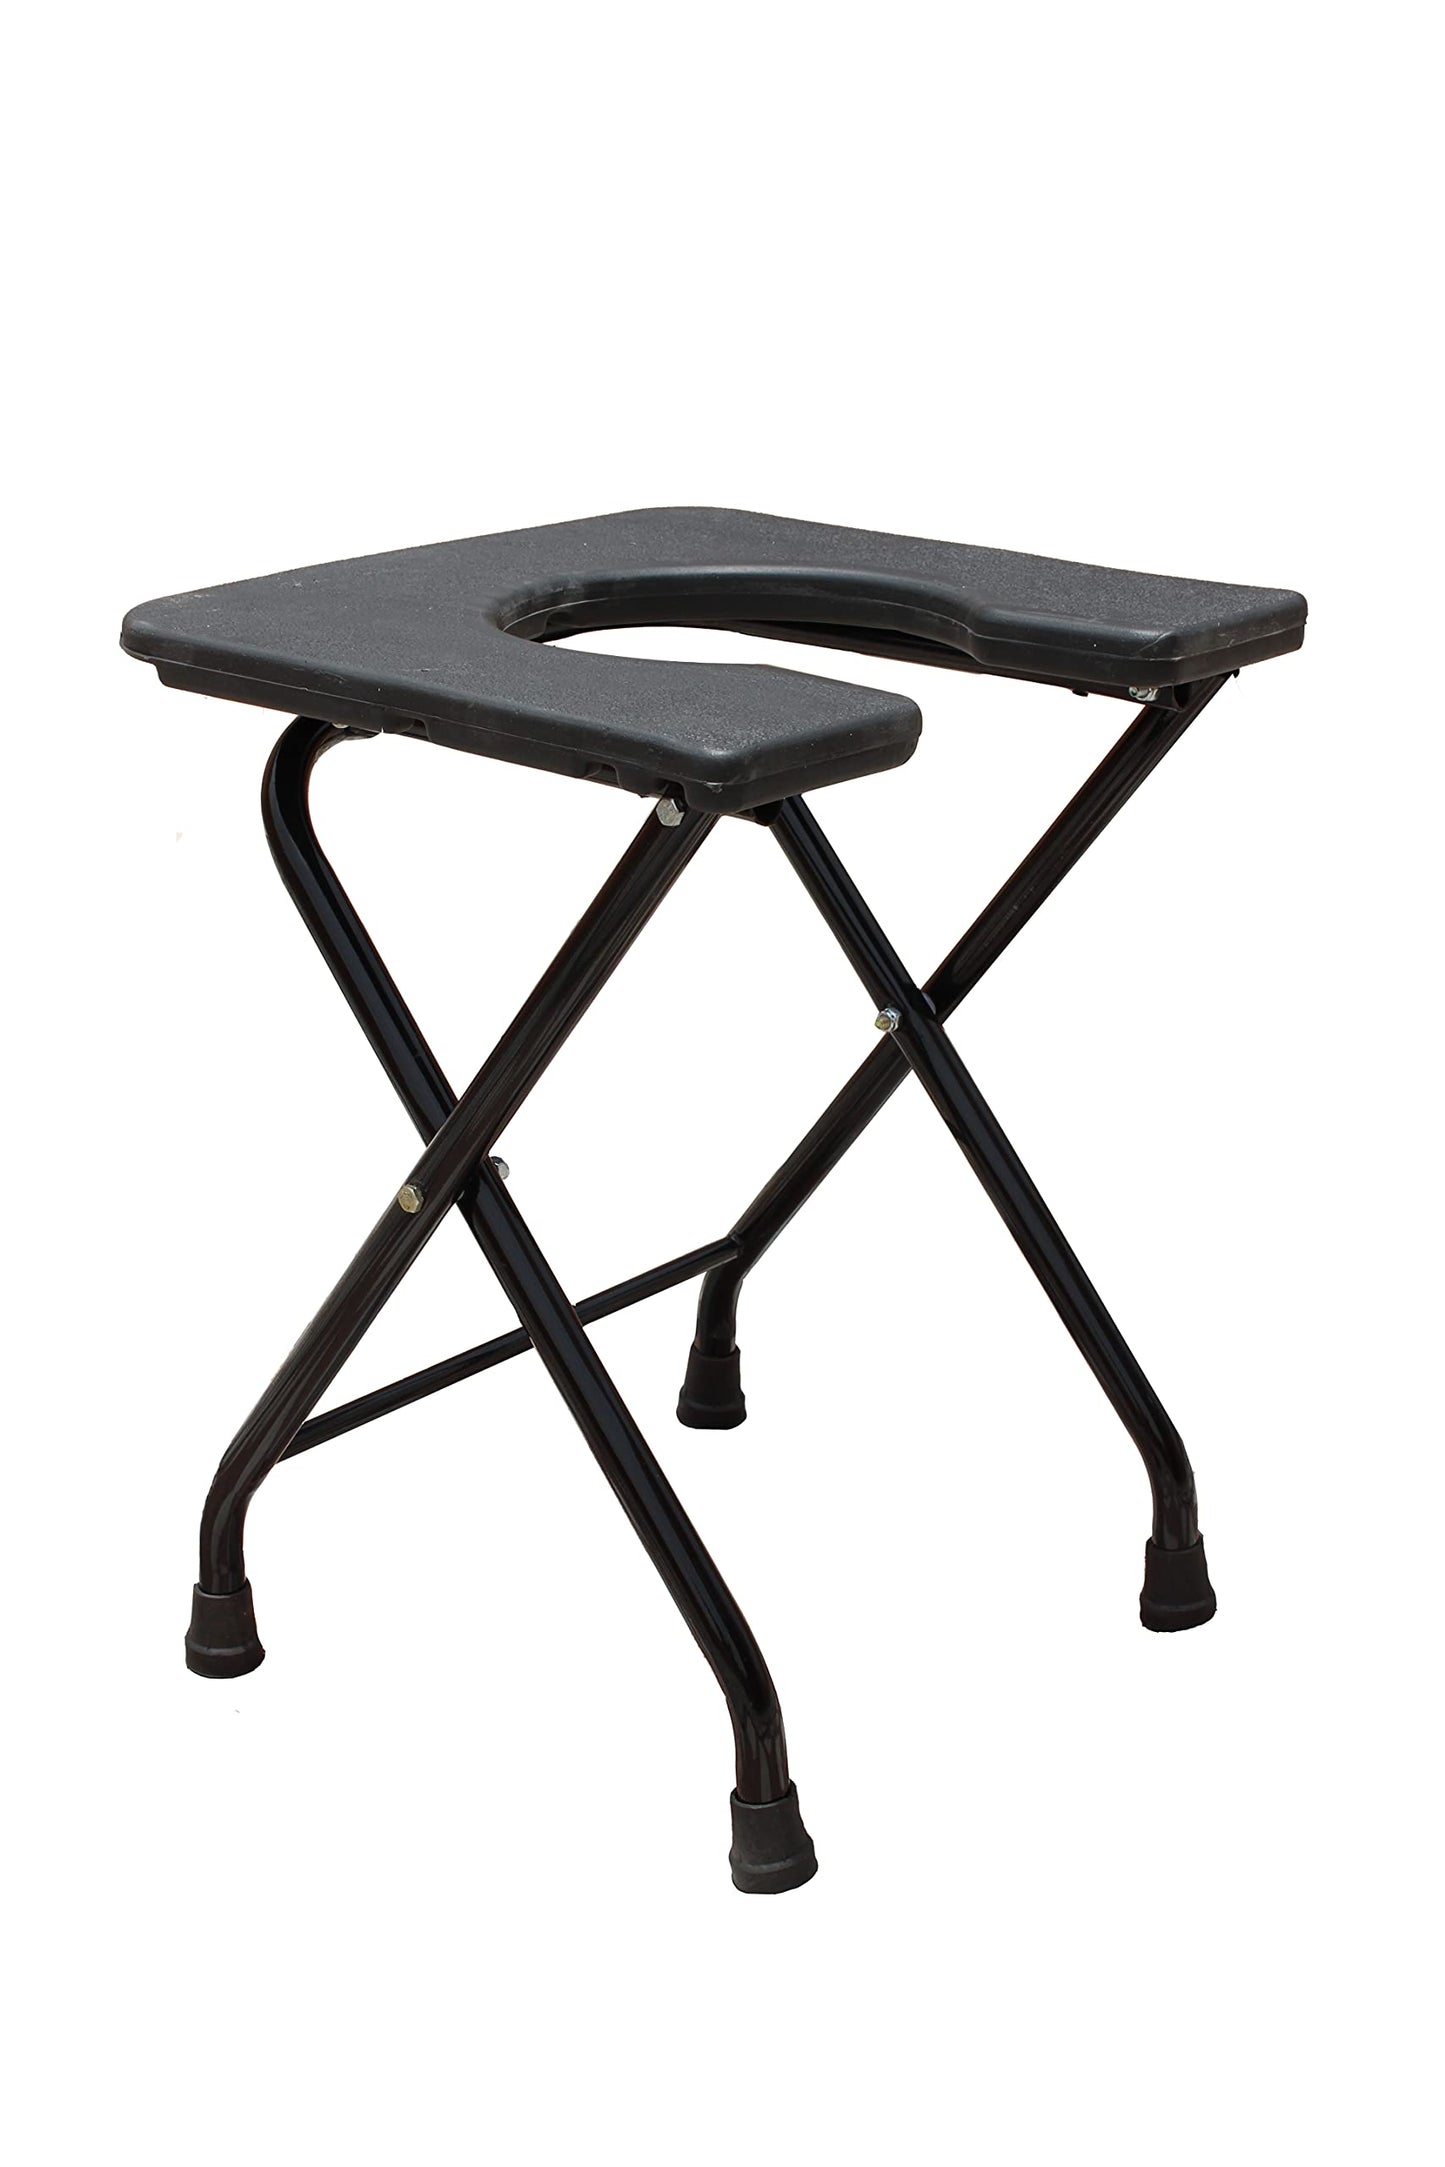 Kds Surgical Heavy Duty Folding Commode Stool